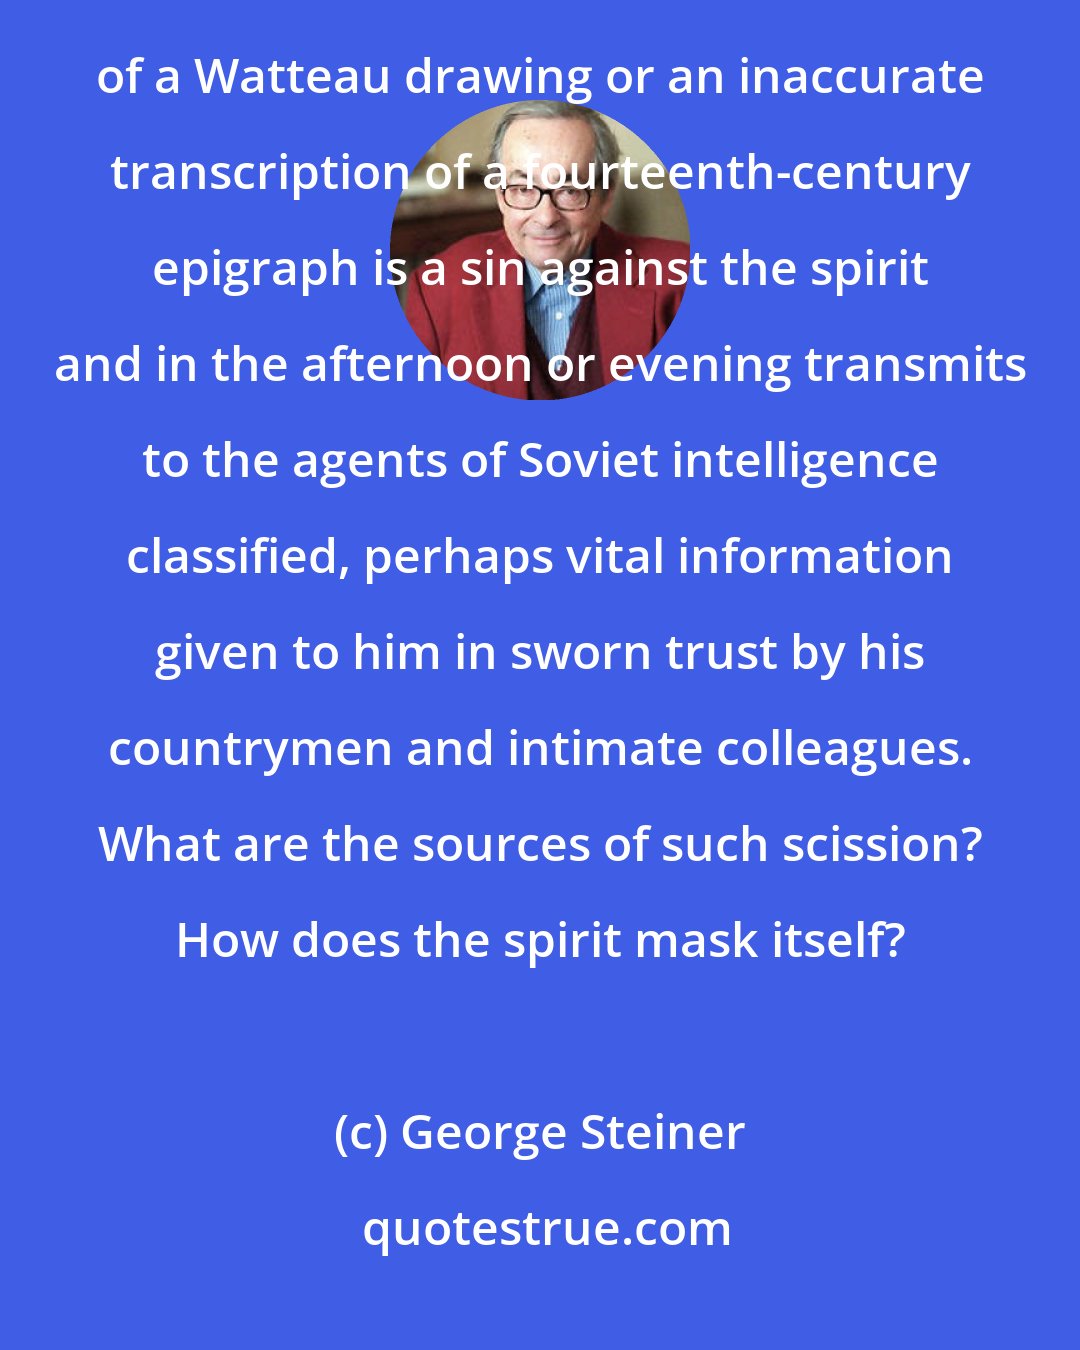 George Steiner: But I would like to think for a moment about a man who in the morning teaches his students that a false attribution of a Watteau drawing or an inaccurate transcription of a fourteenth-century epigraph is a sin against the spirit and in the afternoon or evening transmits to the agents of Soviet intelligence classified, perhaps vital information given to him in sworn trust by his countrymen and intimate colleagues. What are the sources of such scission? How does the spirit mask itself?